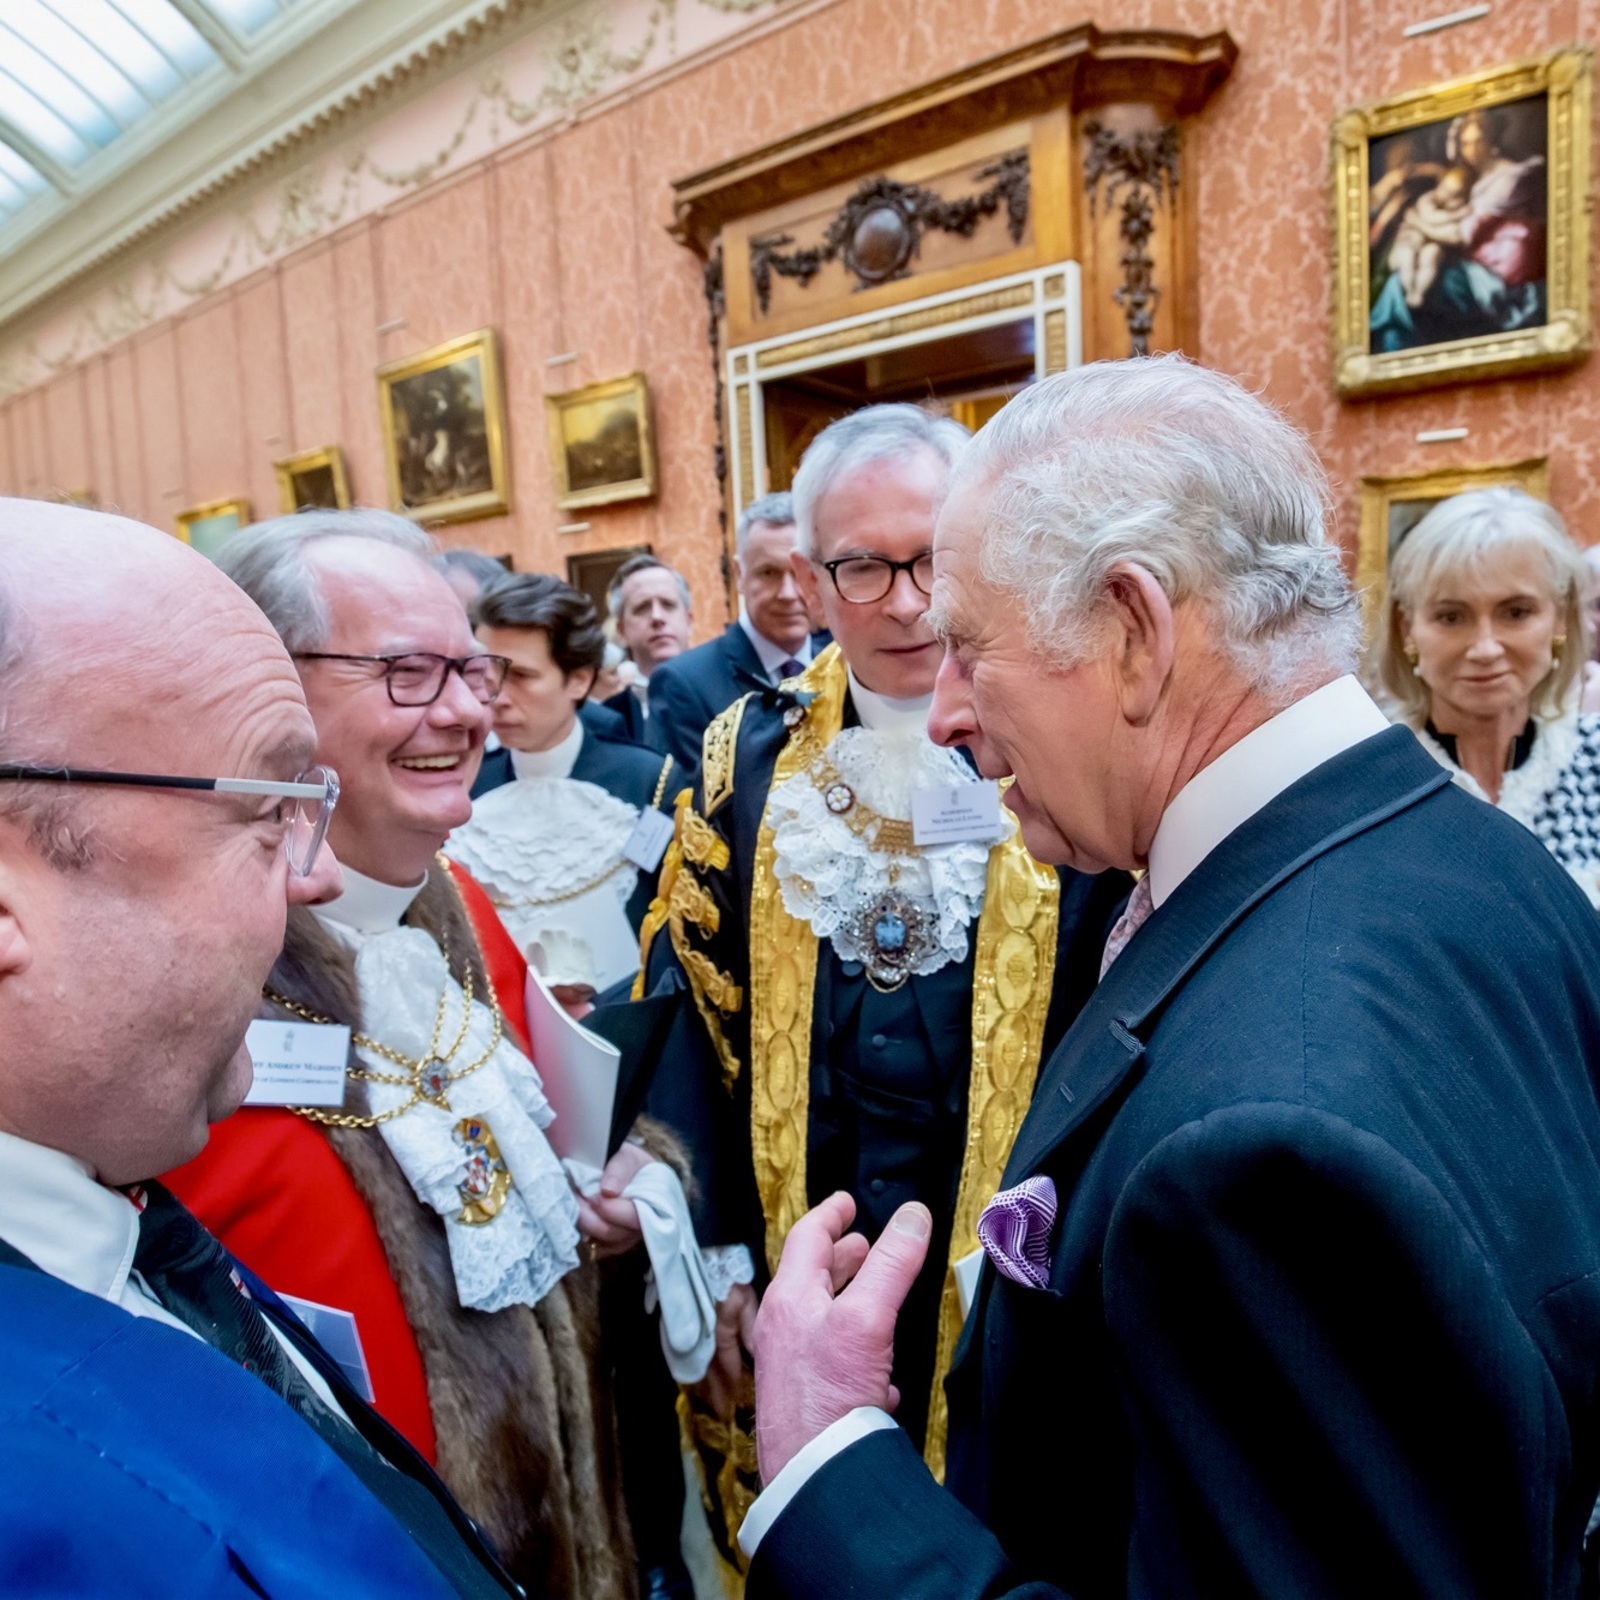 9 Mar 23 - Presentation of Loyal Addresses  Honoured to attend on The Lord Mayor as he made The City’s Loyal Address to HM The King at Buckingham Palace, exercising our right to do so as one of the 27 Privileged Bodies who have a key role in British Society. 